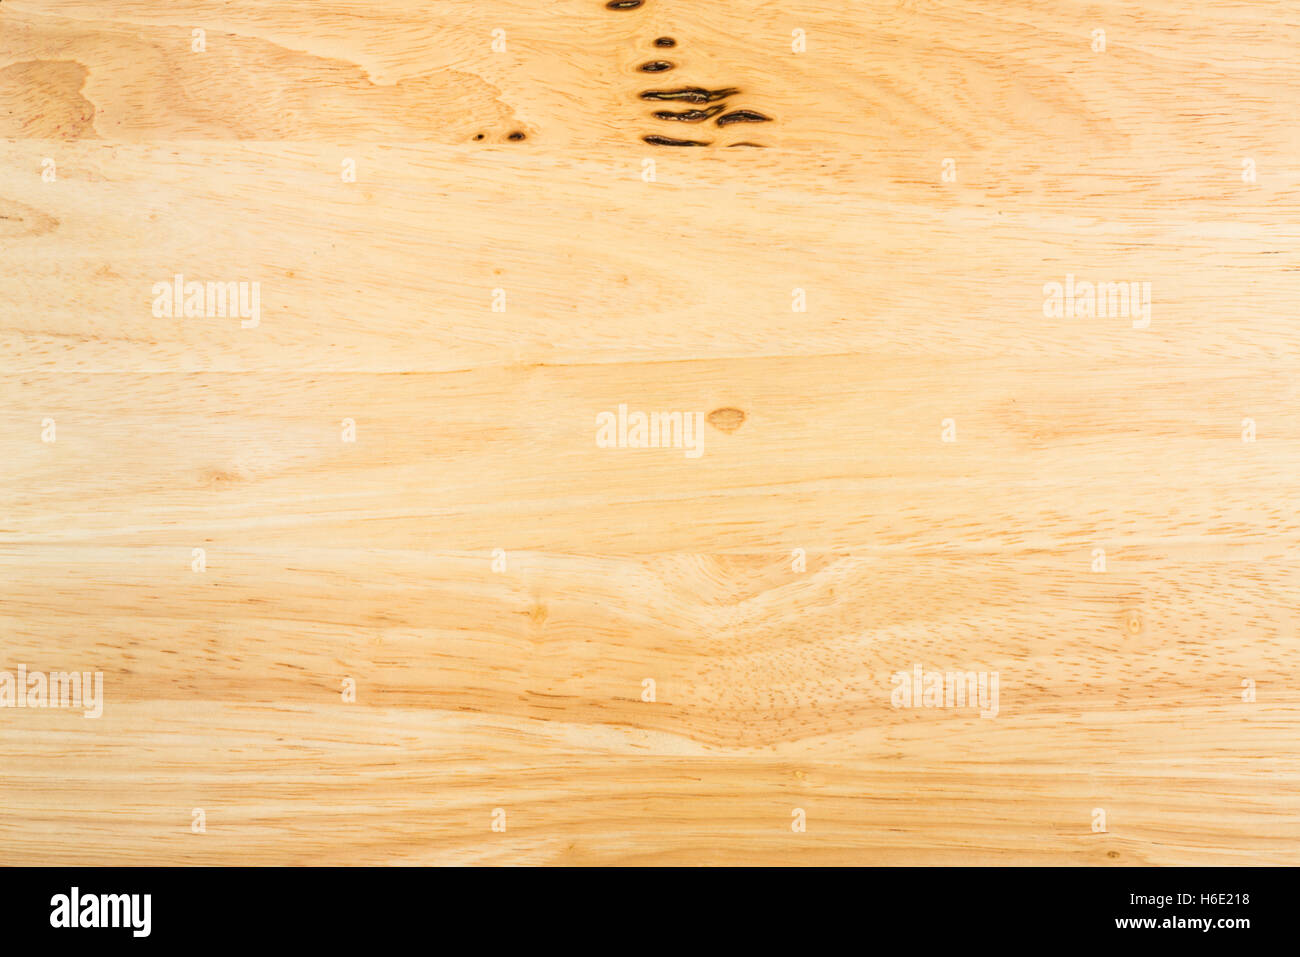 Texture of wood using as a background Stock Photo